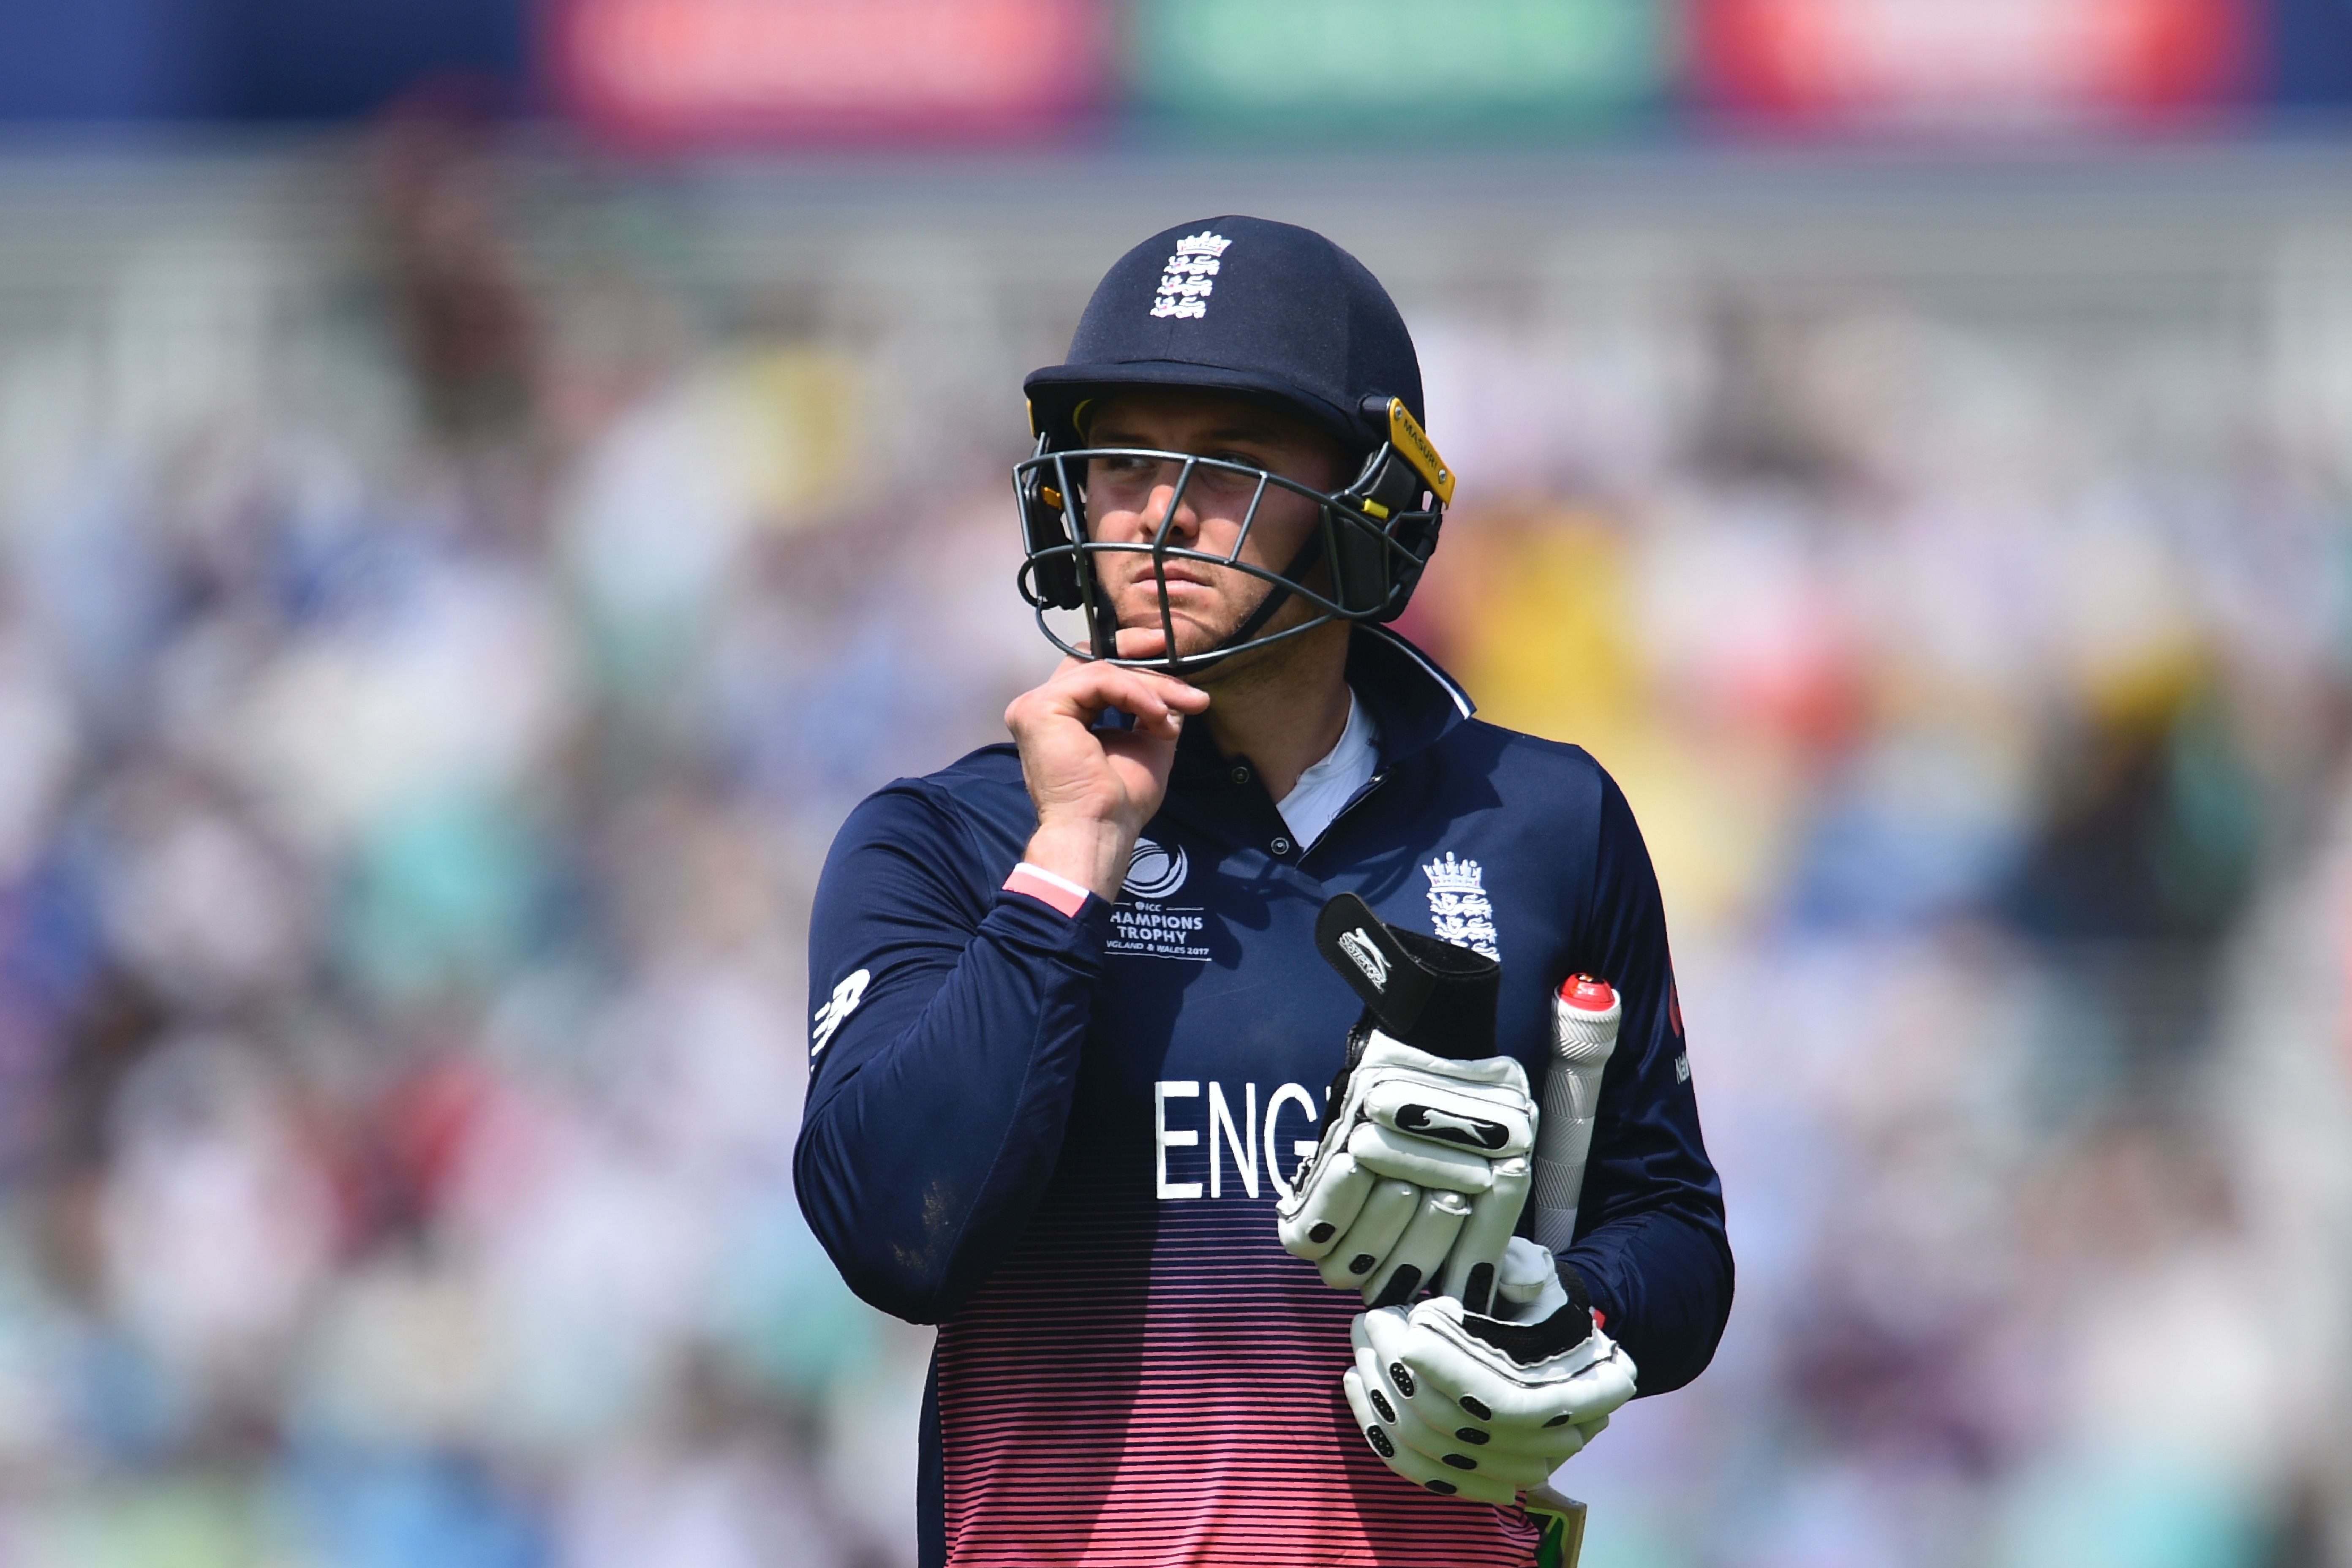 England's Jason Roy leaves the pitch after getting out for 1 run during the ICC Champions trophy cricket match between England and Bangladesh at The Oval in London on June 1, 2017. / AFP PHOTO / Glyn KIRK / RESTRICTED TO EDITORIAL USE (Photo credit should read GLYN KIRK/AFP/Getty Images)